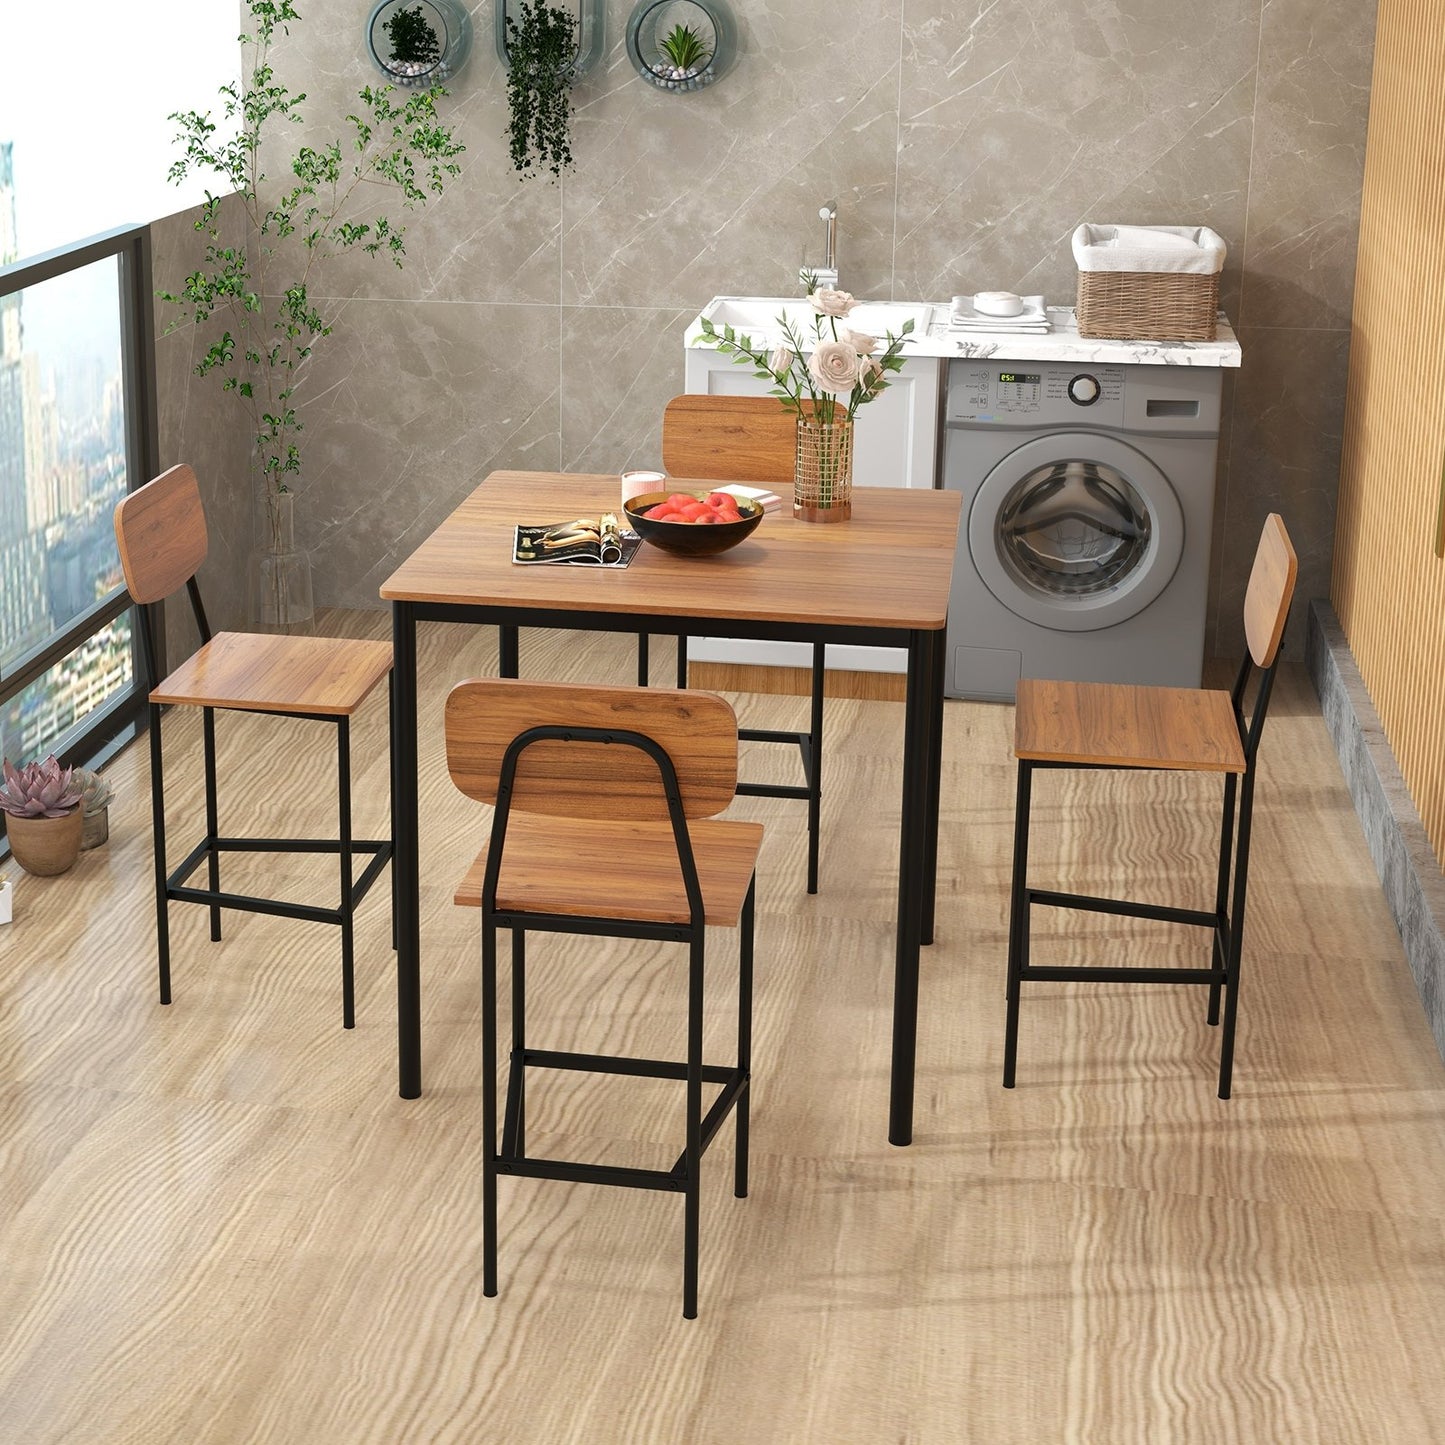 5 Pieces Industrial Dining Table Set with Counter Height Table and 4 Bar Stools, Dark Brown